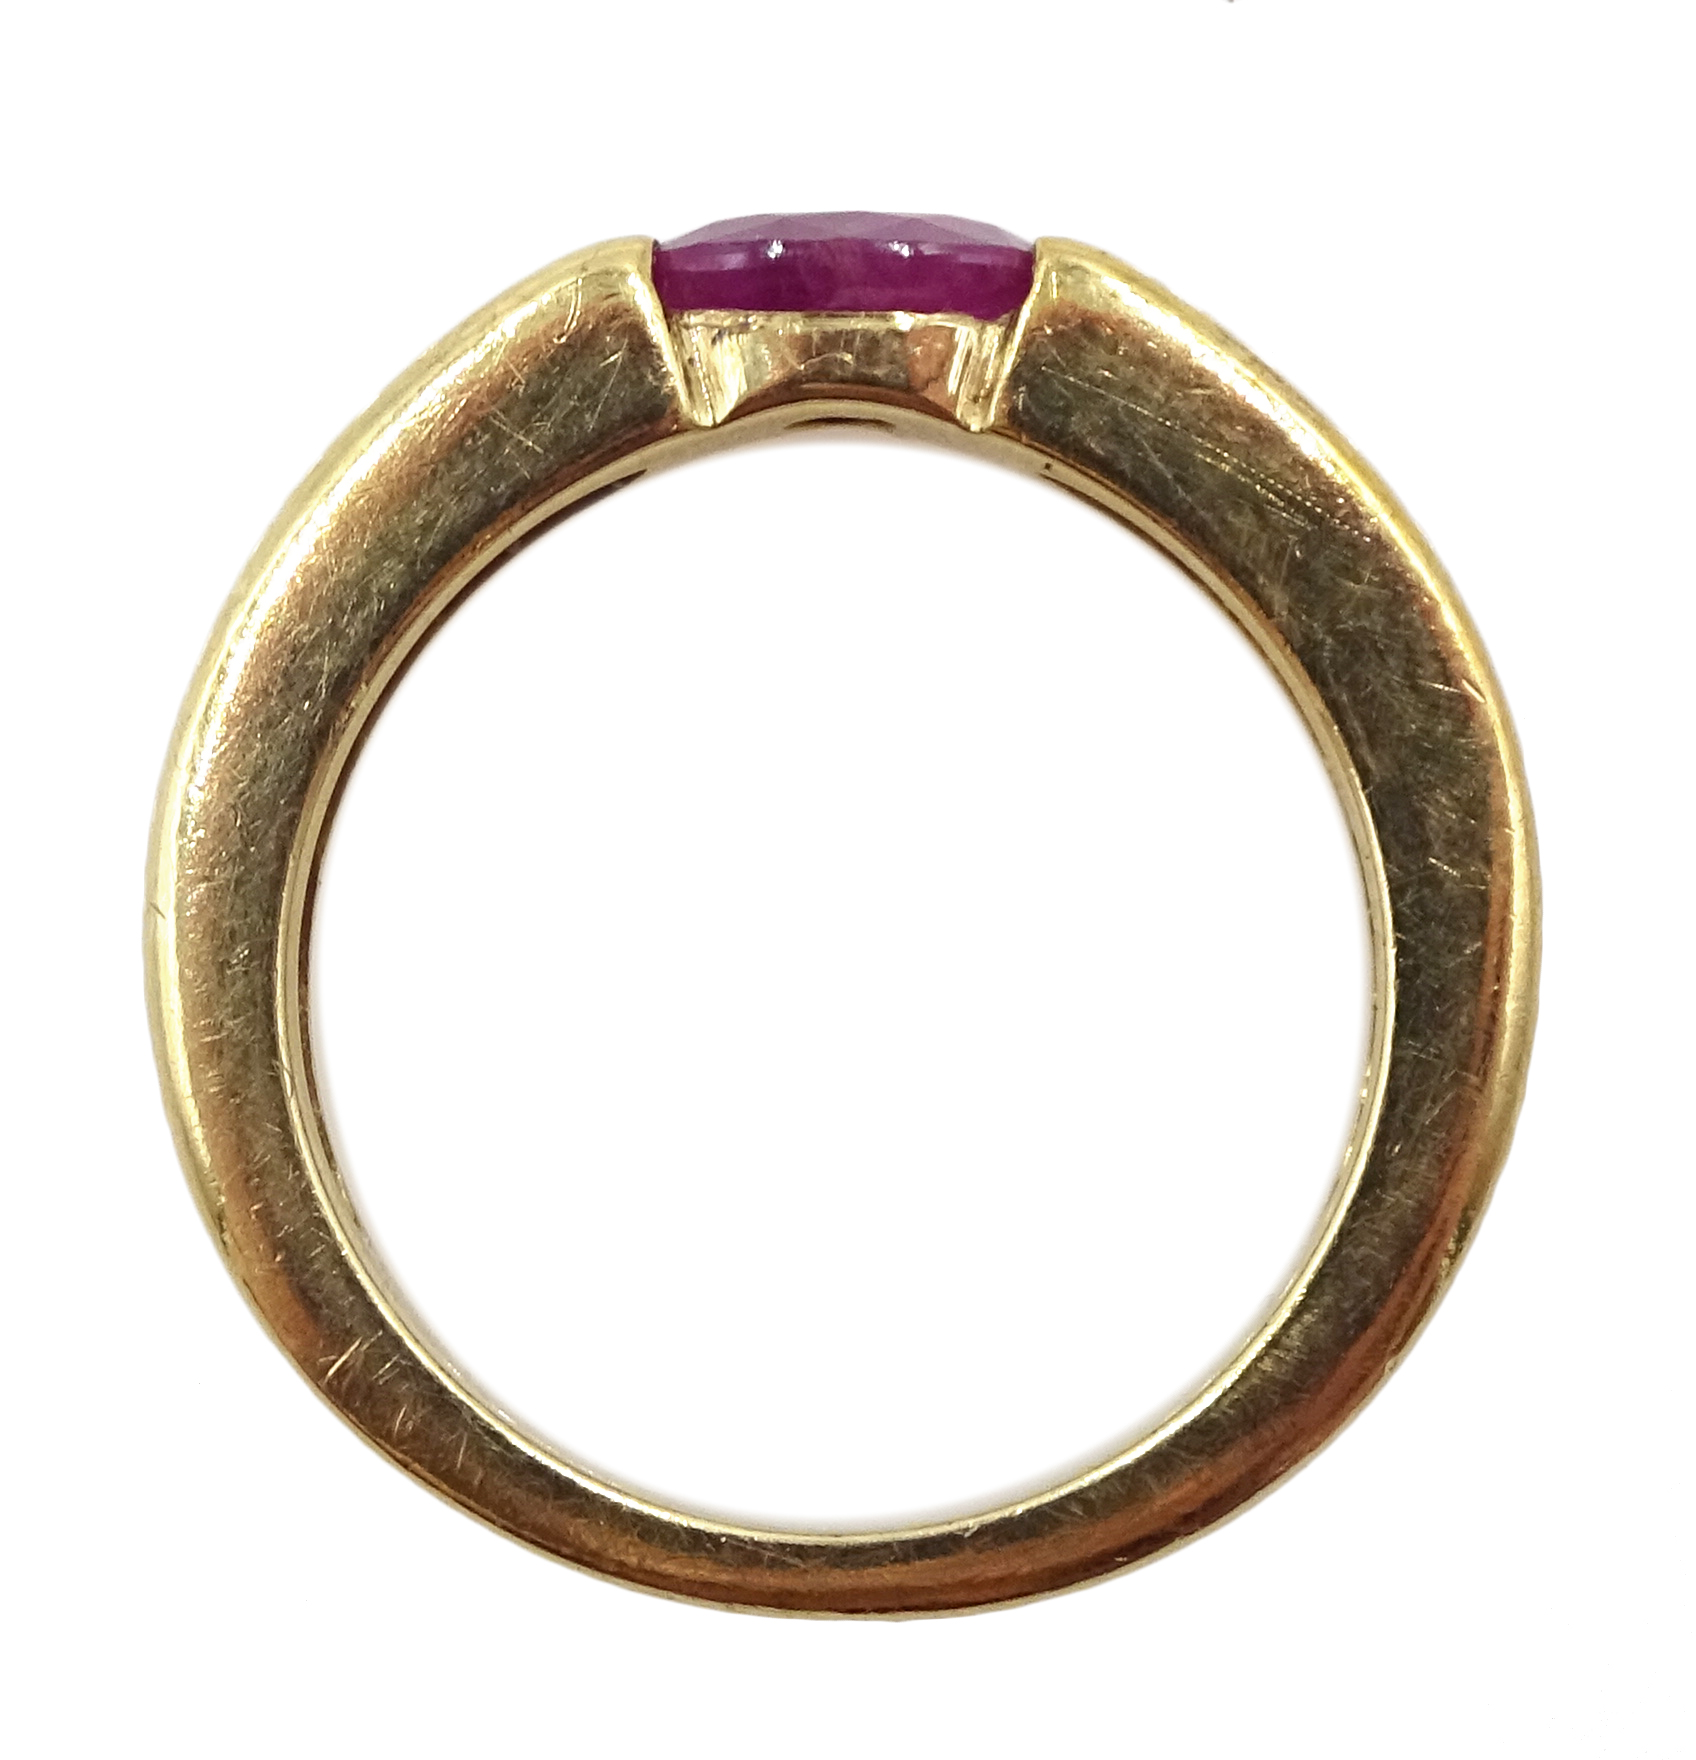 Gold ruby and diamond pendant necklace, pair of matching earrings and a similar ruby ring, all hallm - Image 3 of 3